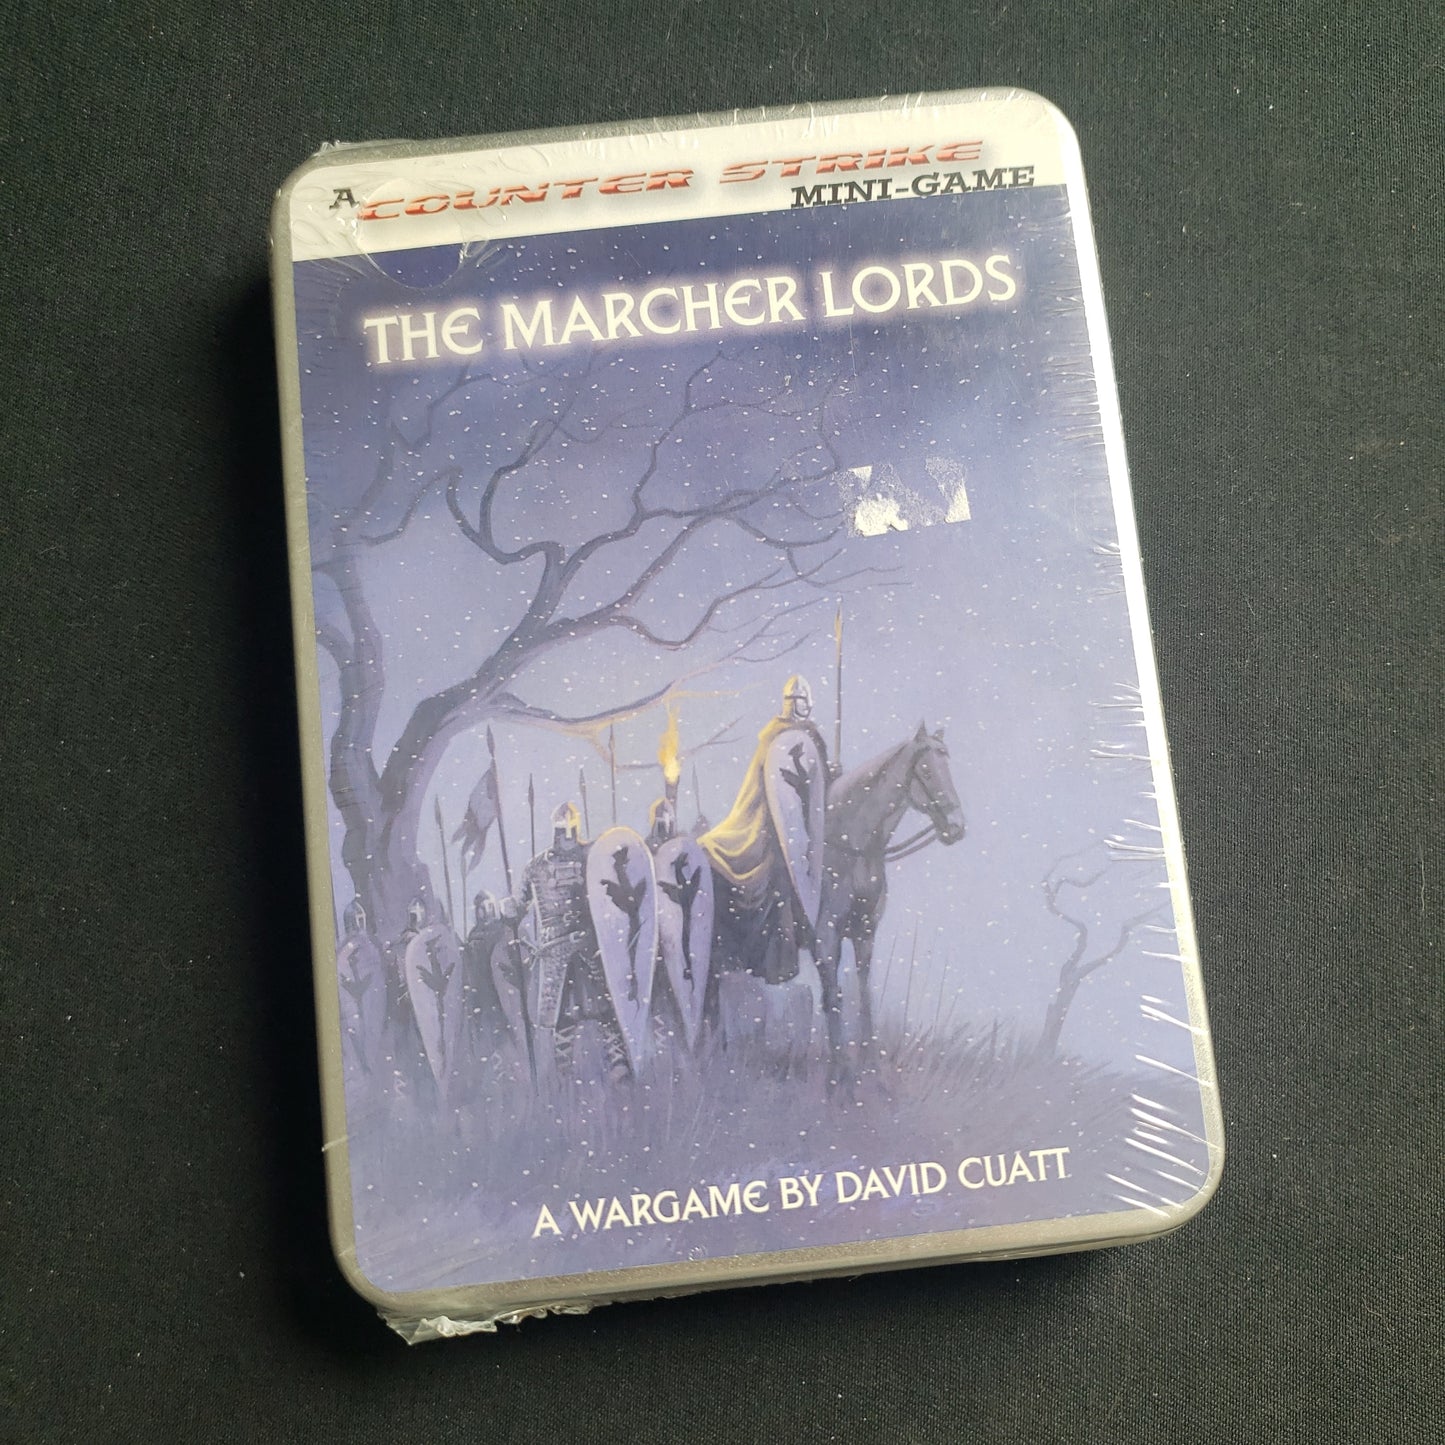 Image shows the front cover of the box of the Marcher Lords board game